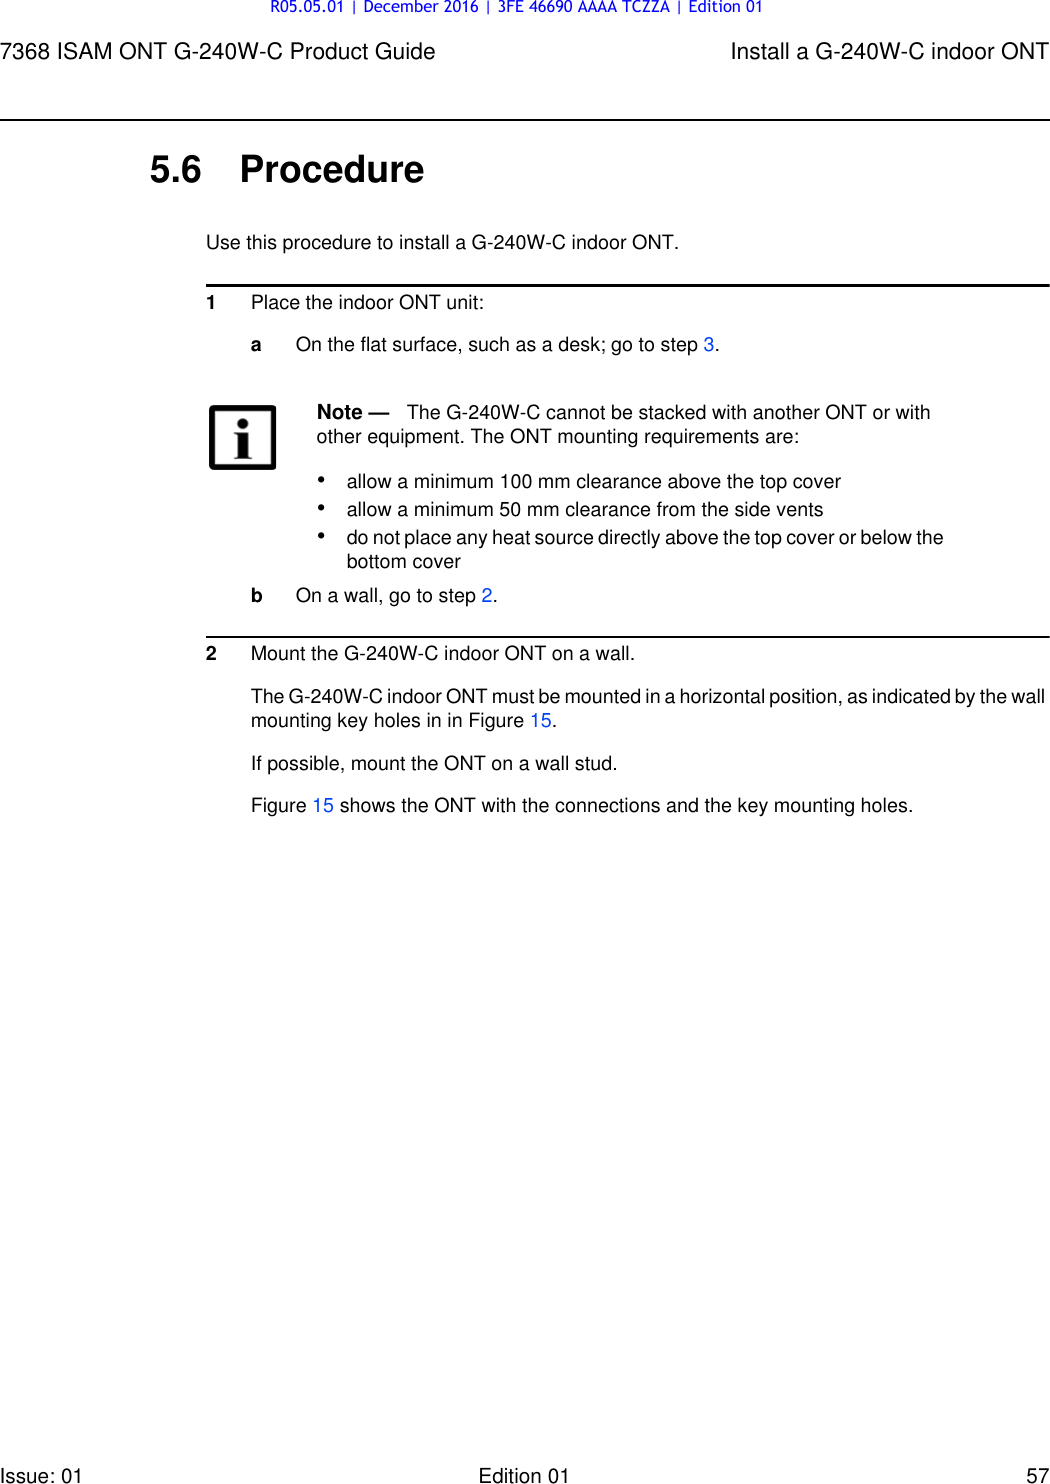 Page 57 of Nokia Bell G240W-C GPON ONU User Manual 7368 ISAM ONT G 240W B Product Guide